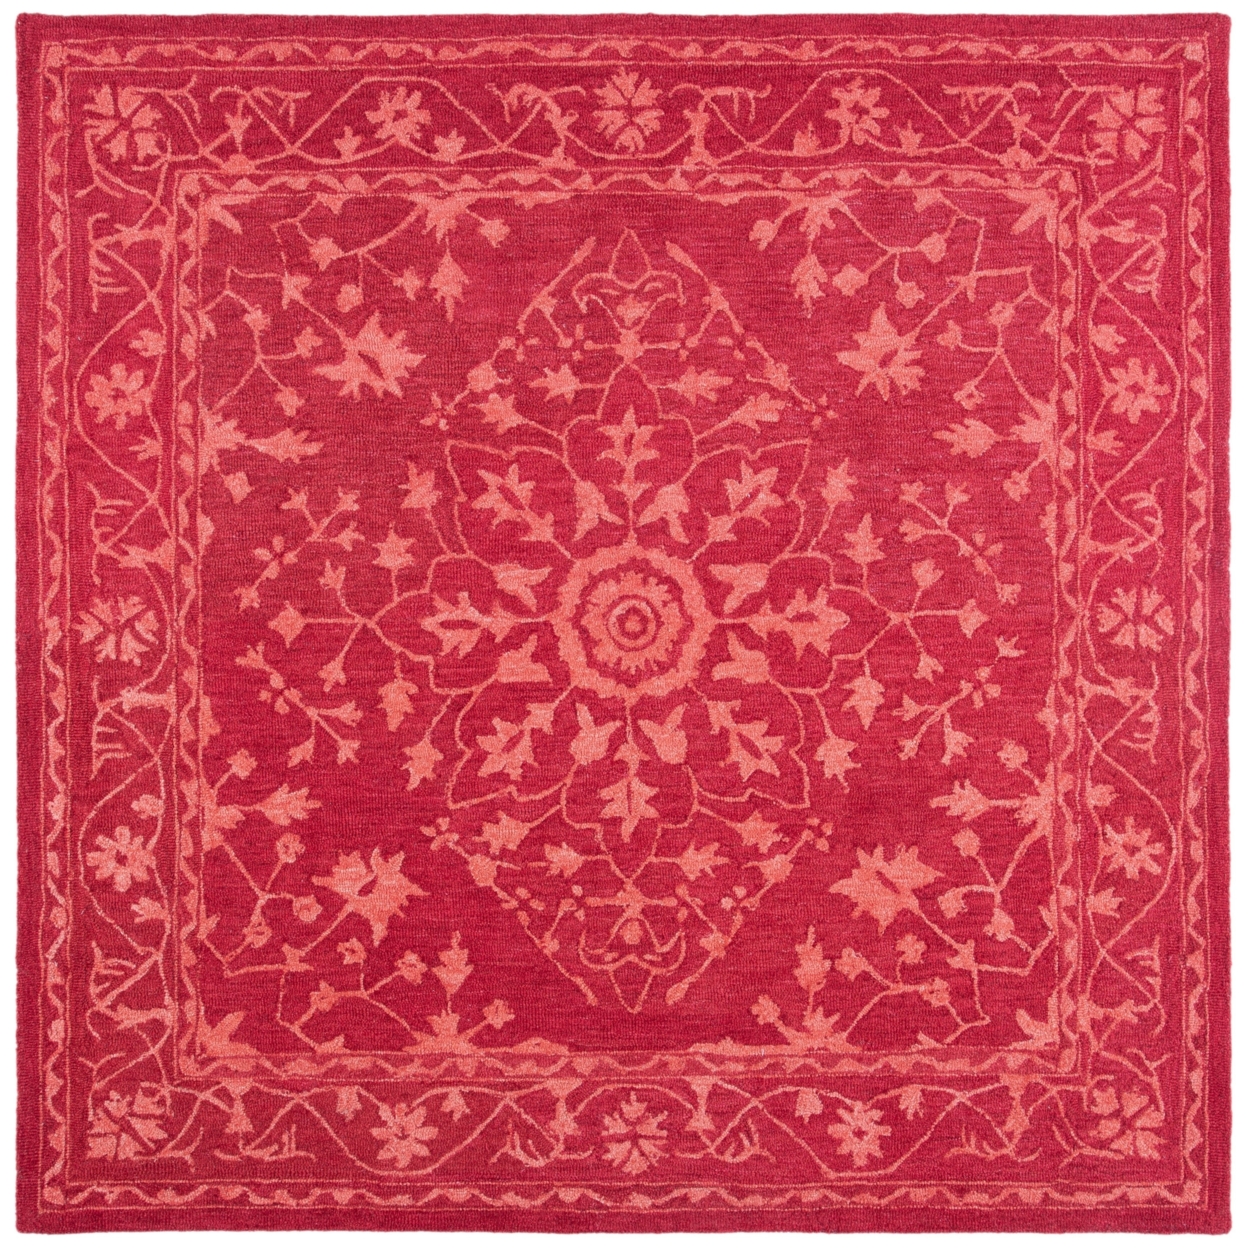 SAFAVIEH Dip Dye Collection DDY702Q Handmade Red Rug - 7' Square